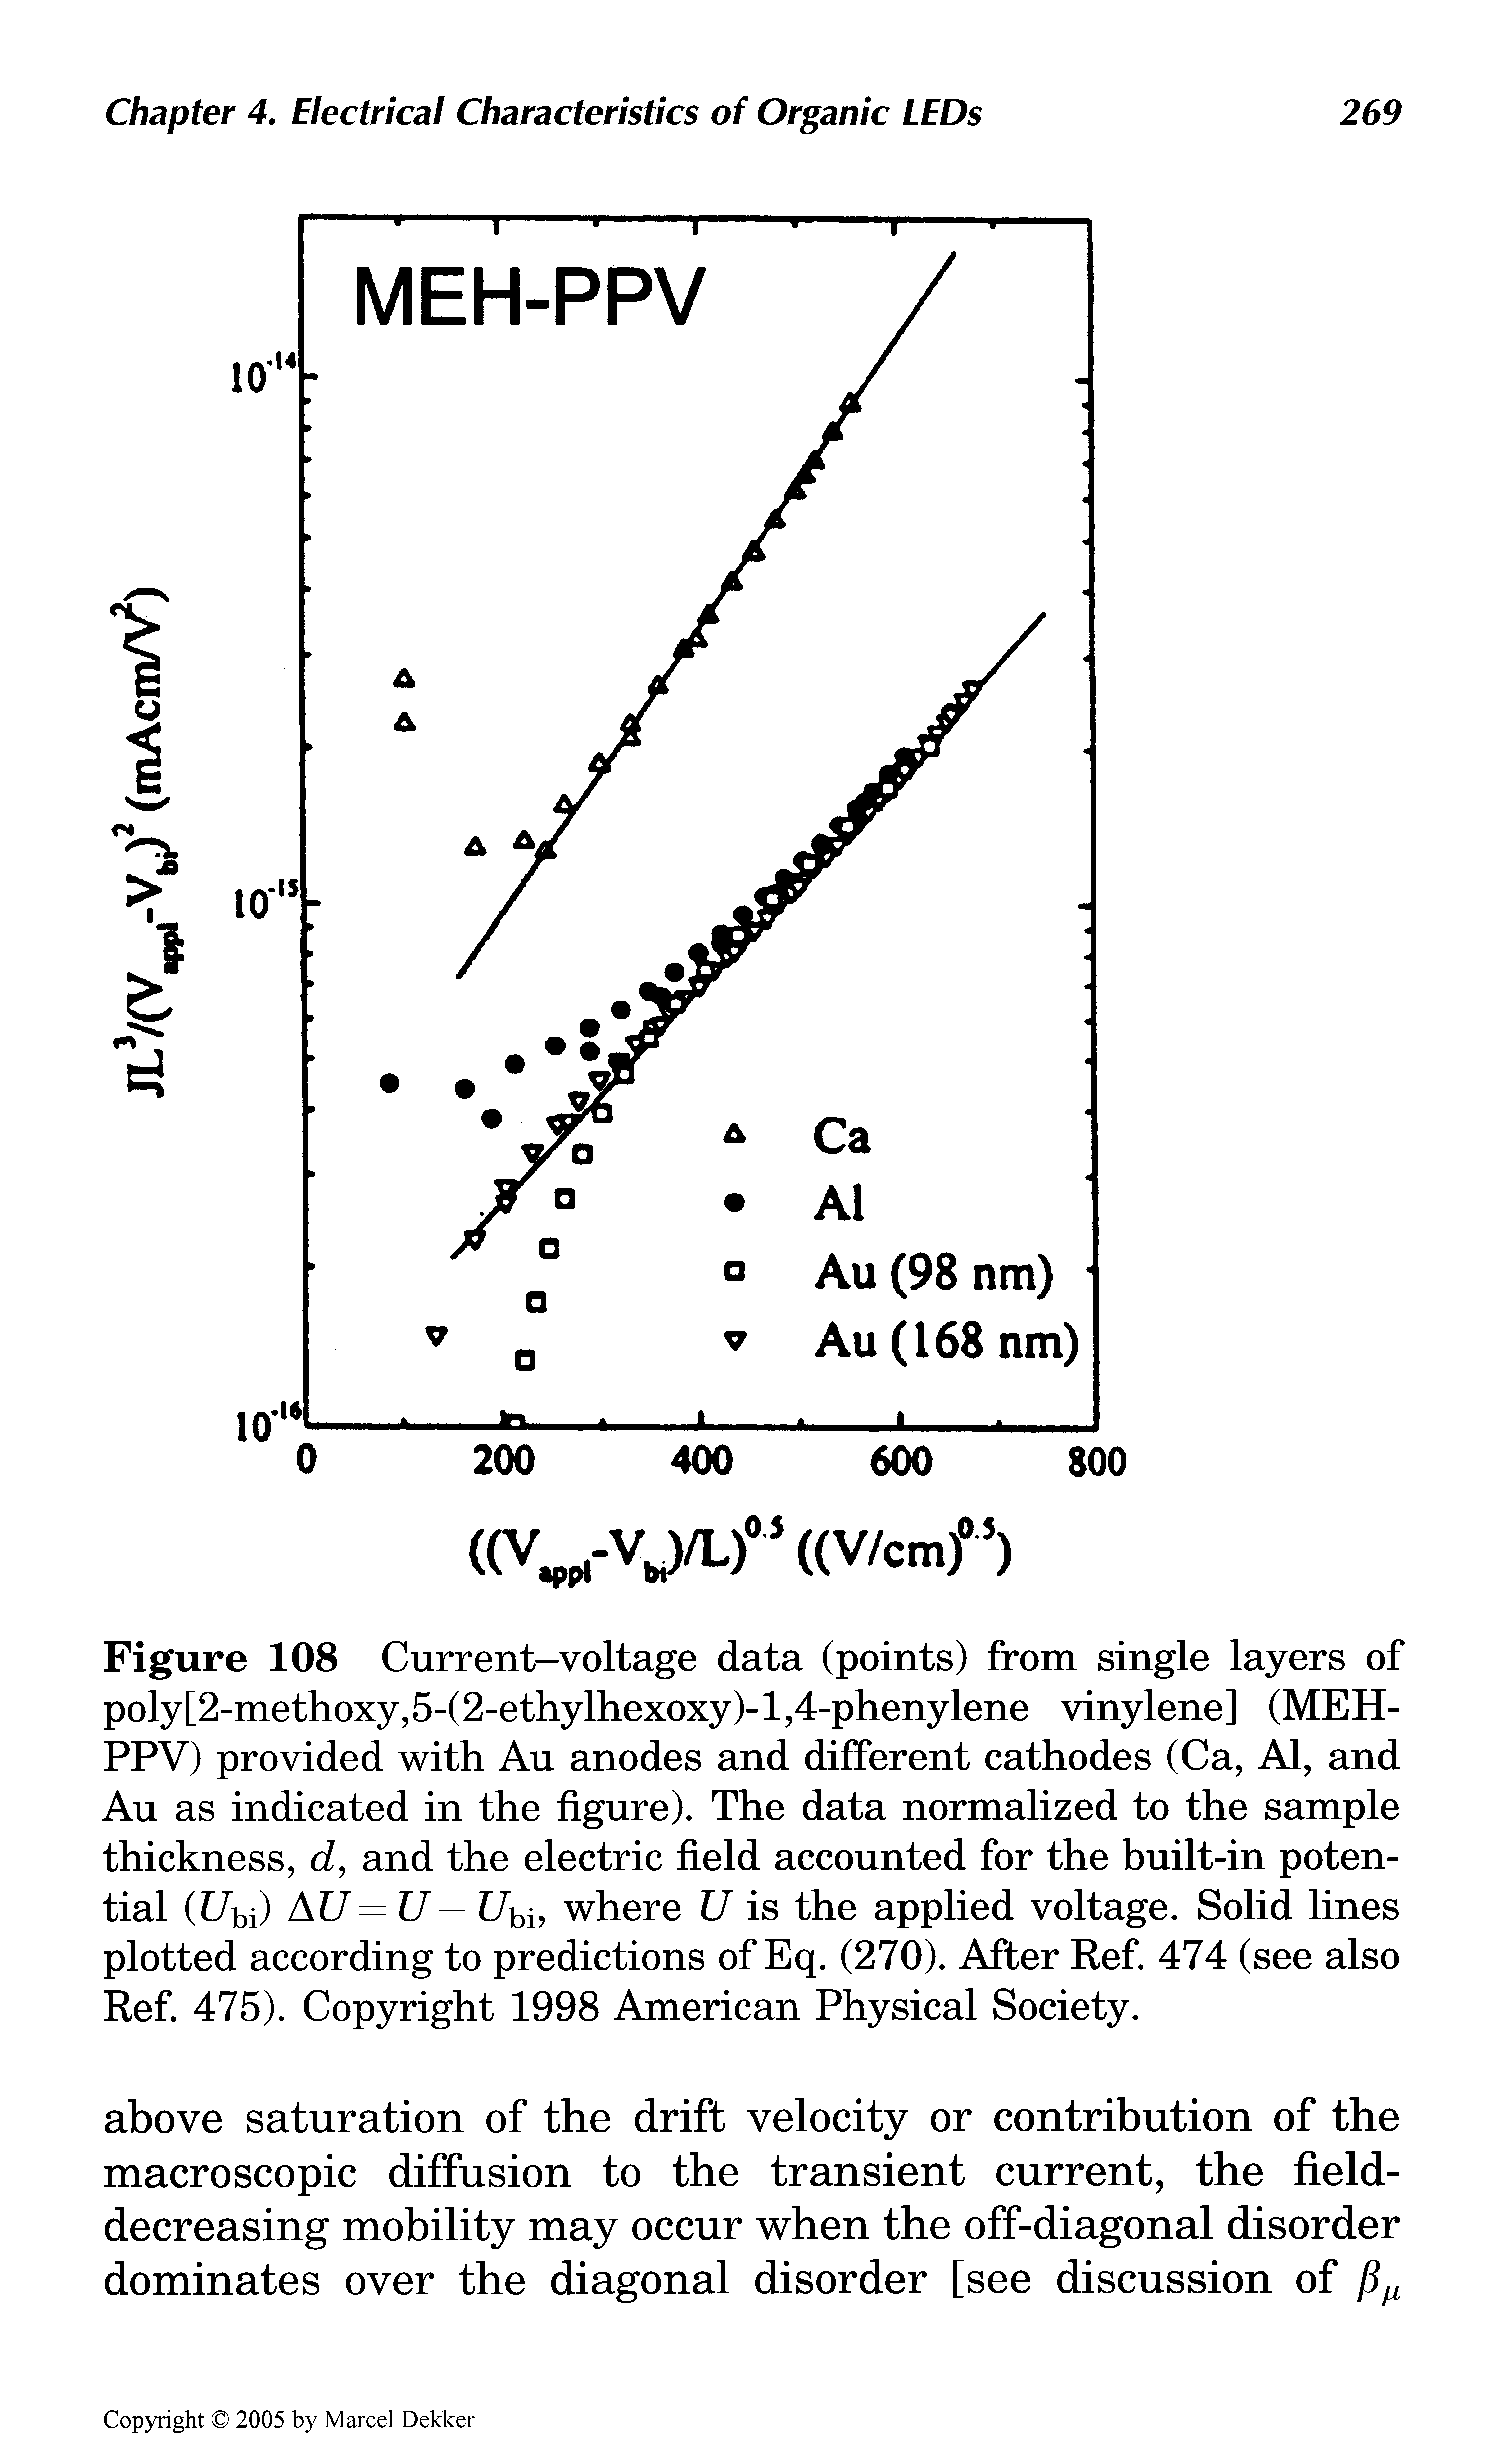 Figure 108 Current-voltage data (points) from single layers of poly[2-methoxy,5-(2-ethylhexoxy)-l,4-phenylene vinylene] (MEH-PPV) provided with Au anodes and different cathodes (Ca, Al, and Au as indicated in the figure). The data normalized to the sample thickness, d, and the electric field accounted for the built-in potential (f/bi) AU=U — f/bi, where U is the applied voltage. Solid lines plotted according to predictions of Eq. (270). After Ref. 474 (see also Ref. 475). Copyright 1998 American Physical Society.